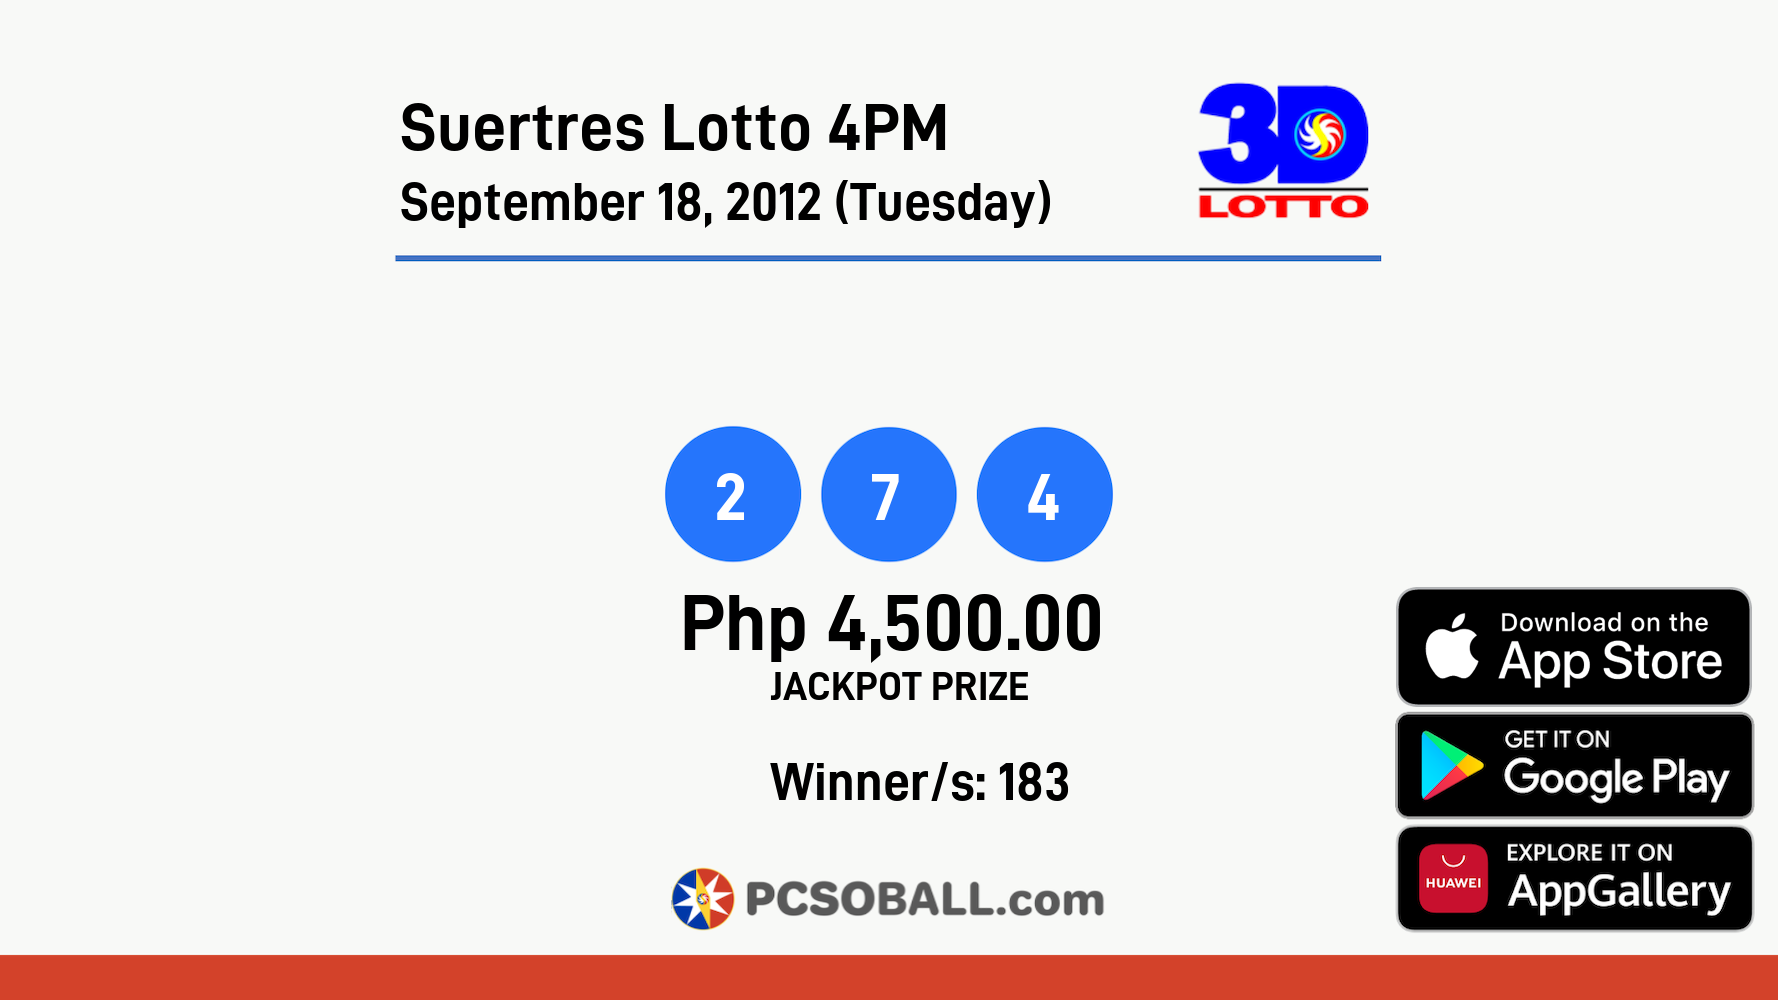 Suertres Lotto 4PM September 18, 2012 (Tuesday) Result